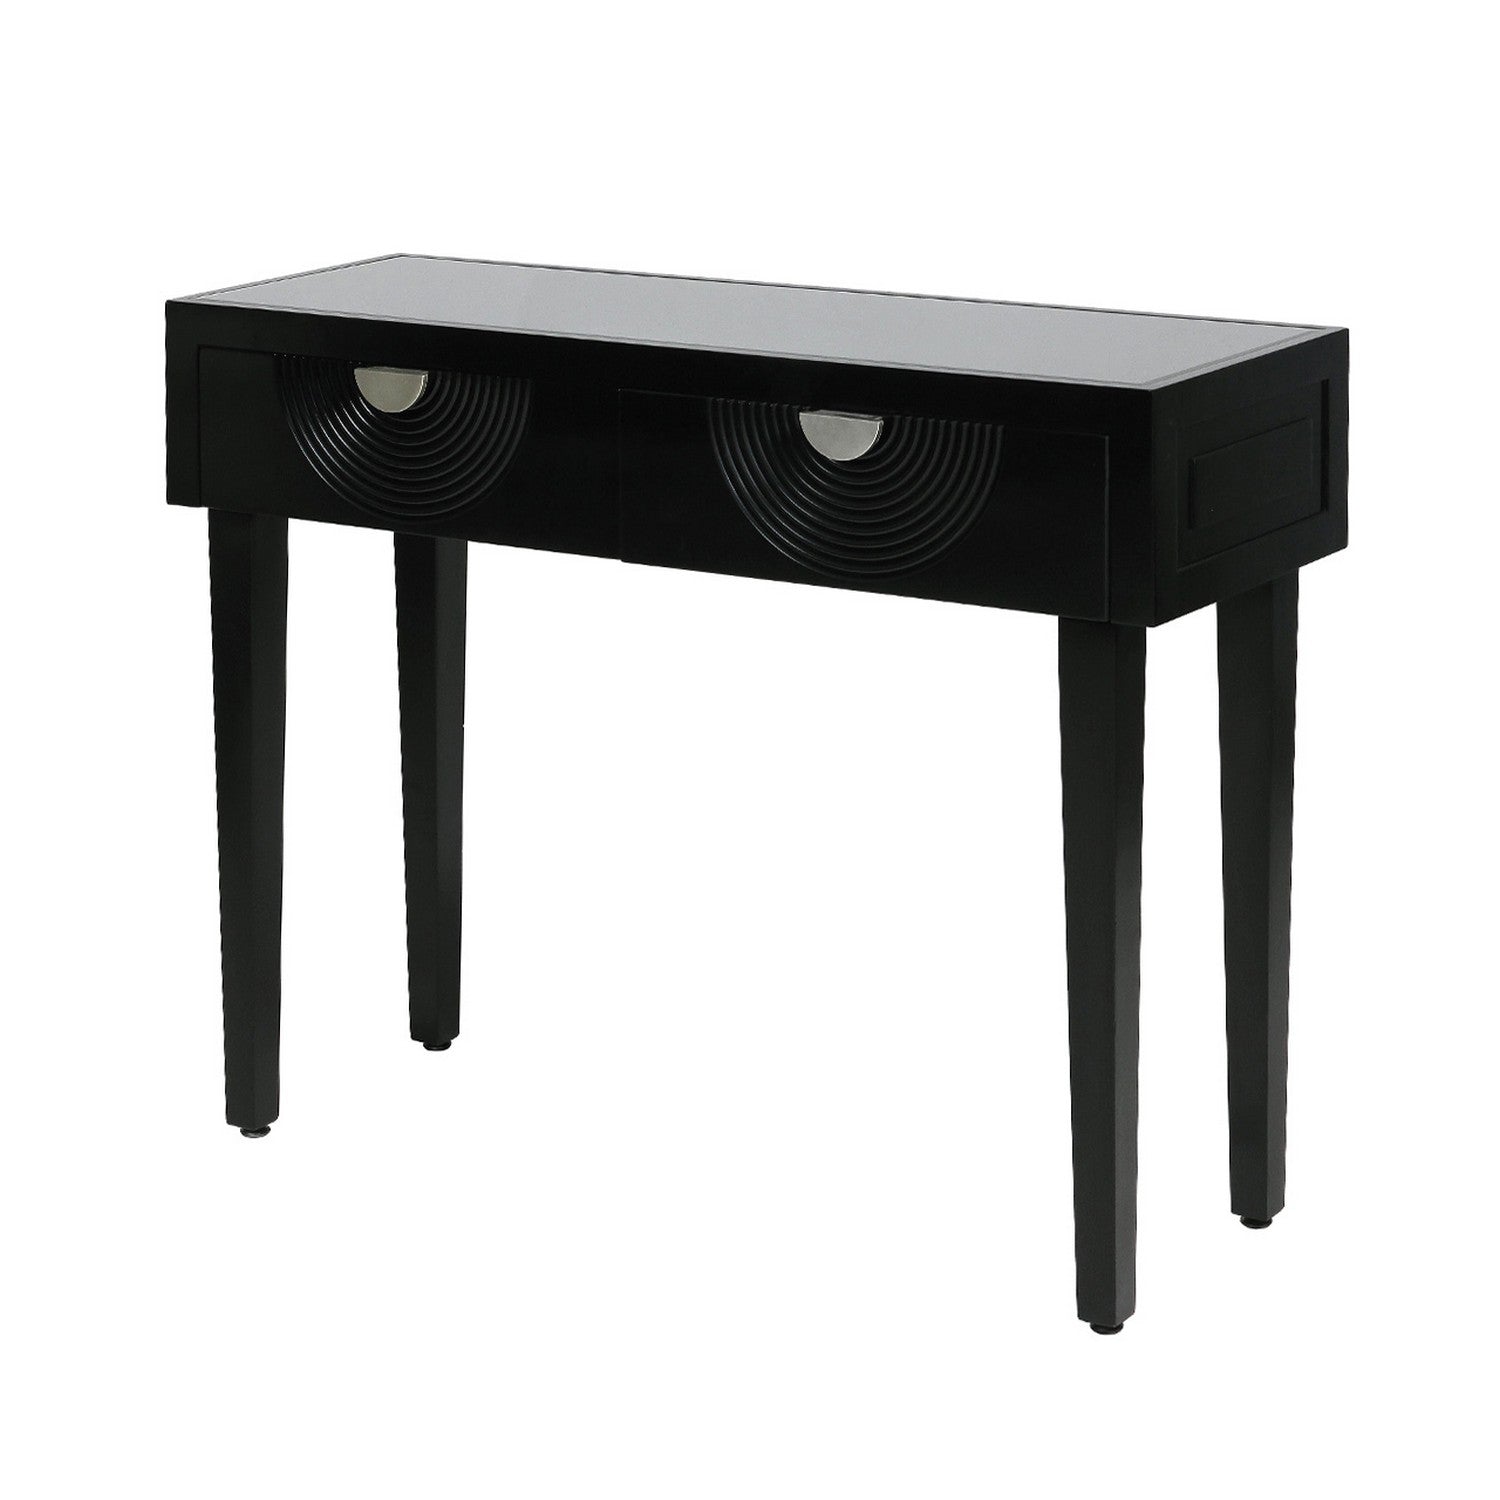 2 Black Drawer Console Table with Smoked Mirror Top